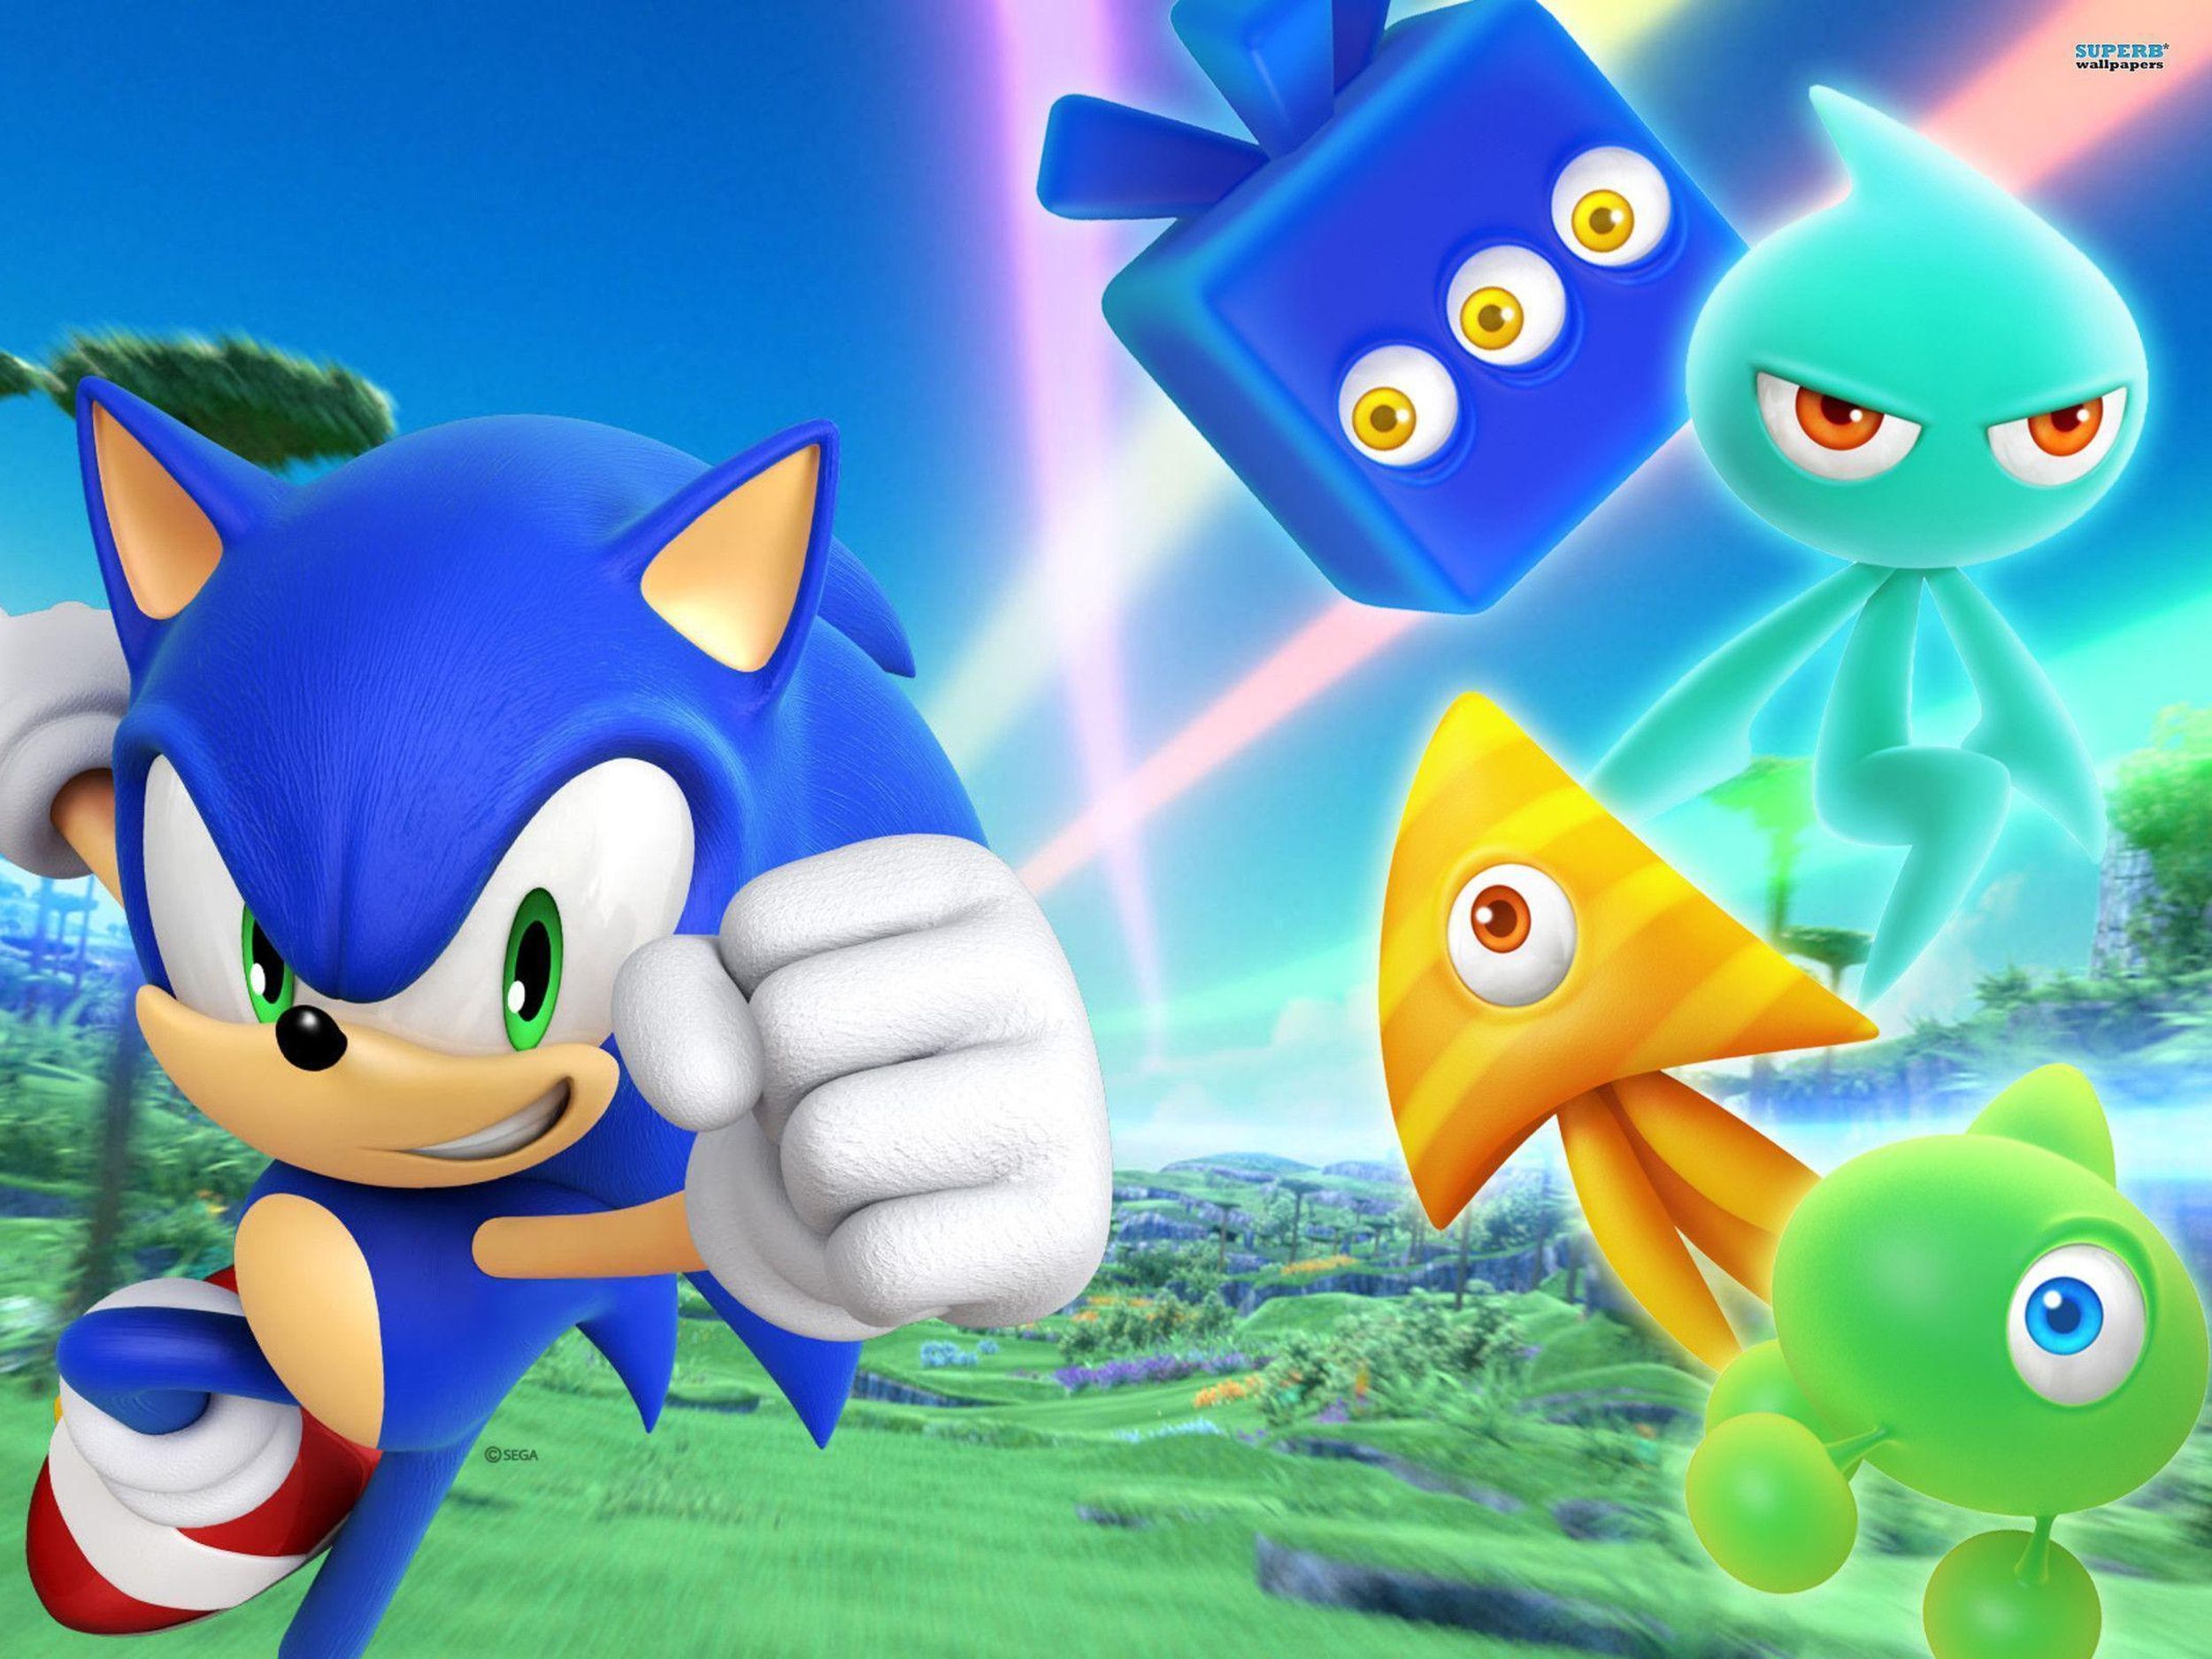 Fan Game do Sonic Colors para Android!!! 